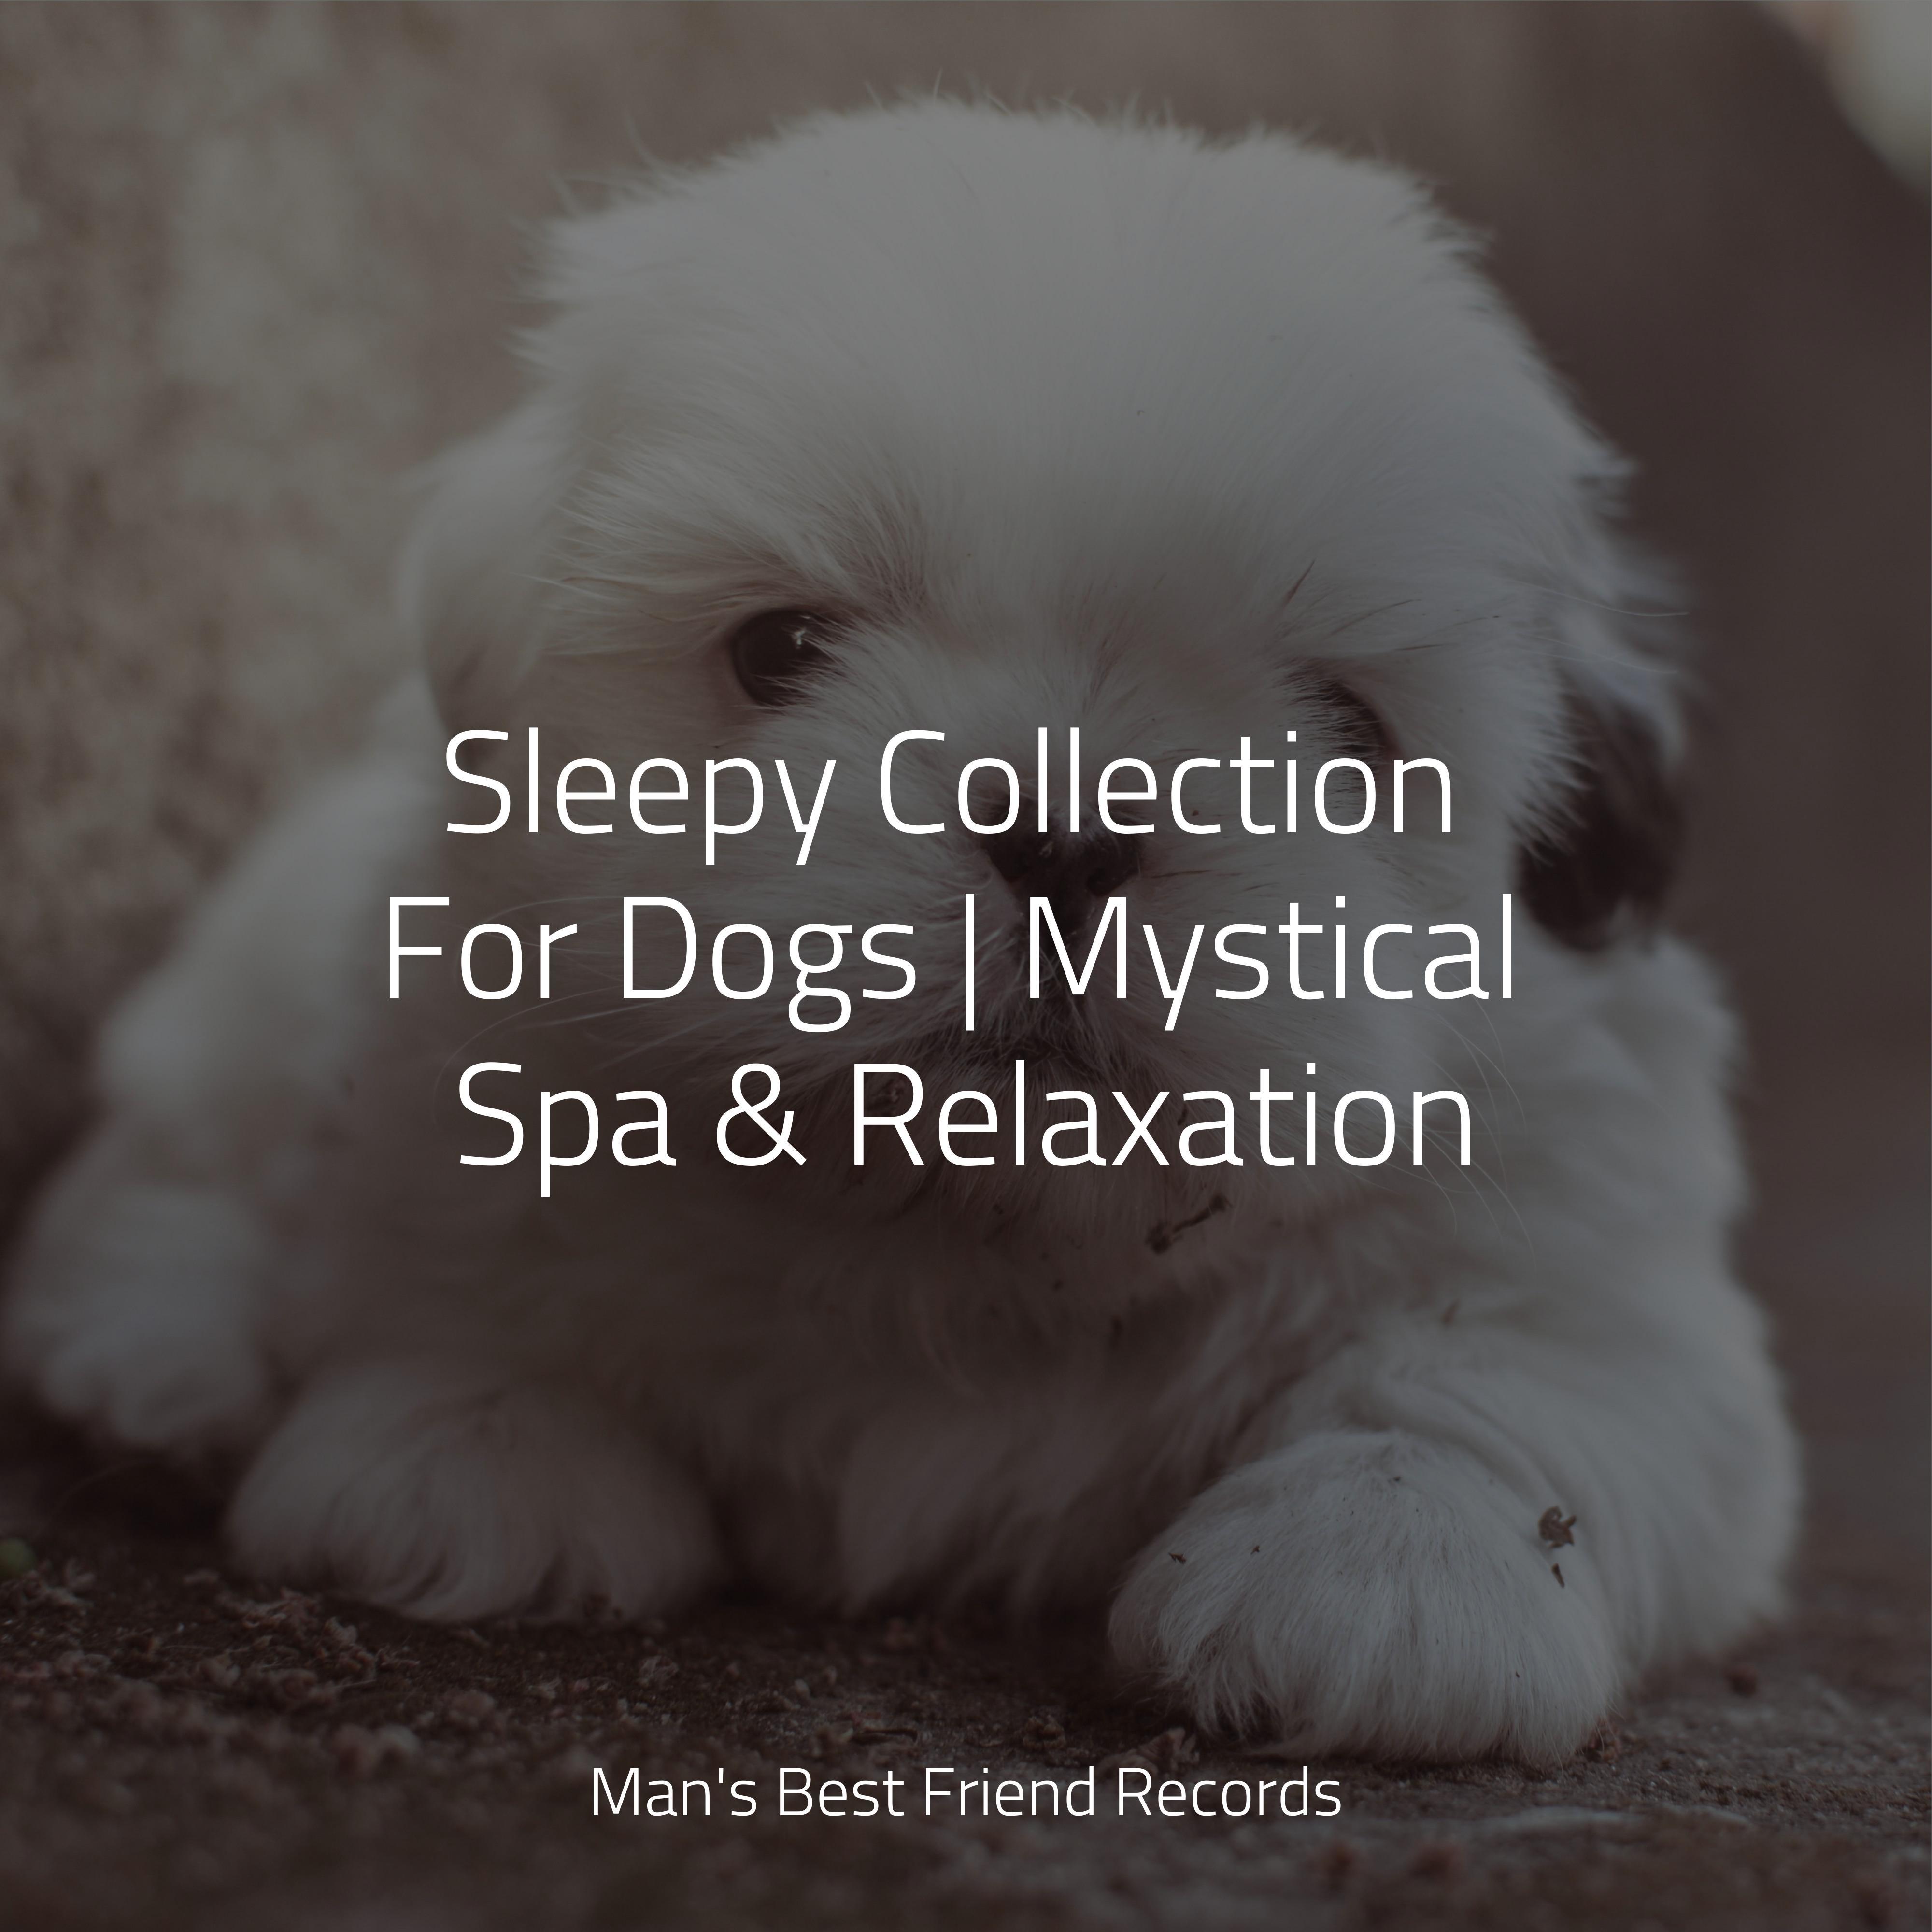 Music For Dogs Peace - Drift Away into Dreams